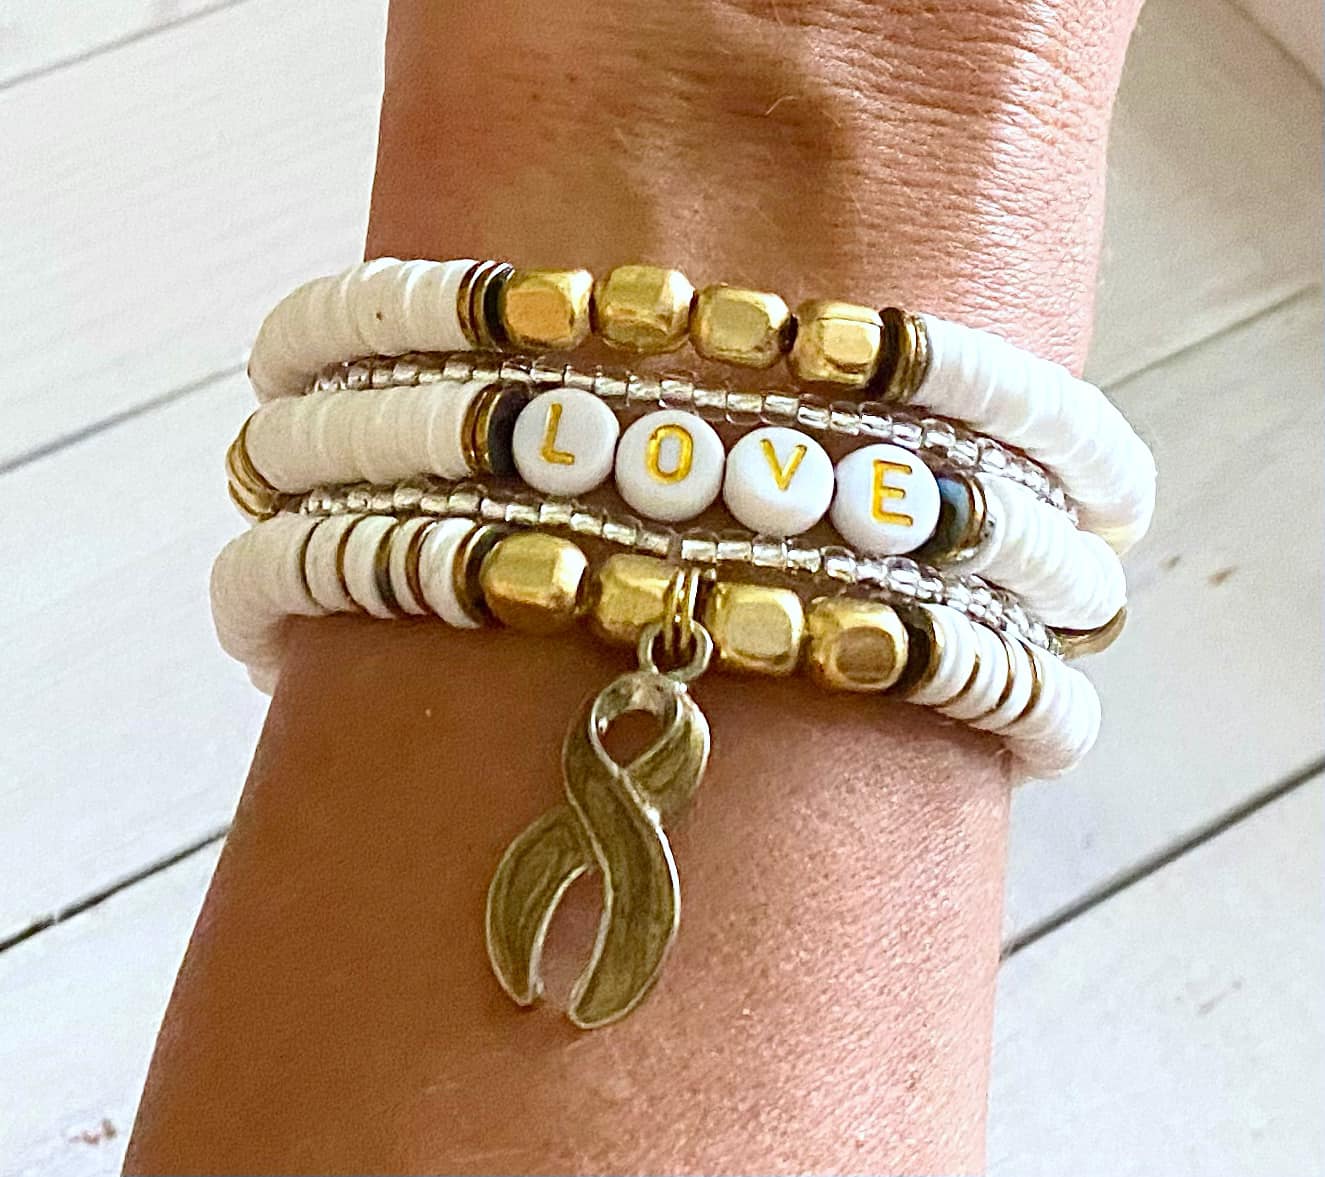 Elevate your friendship bracelet game with our Bling Block Bracelet. It's  the grown-up twist on those childhood friendship pacts, blend... | Instagram